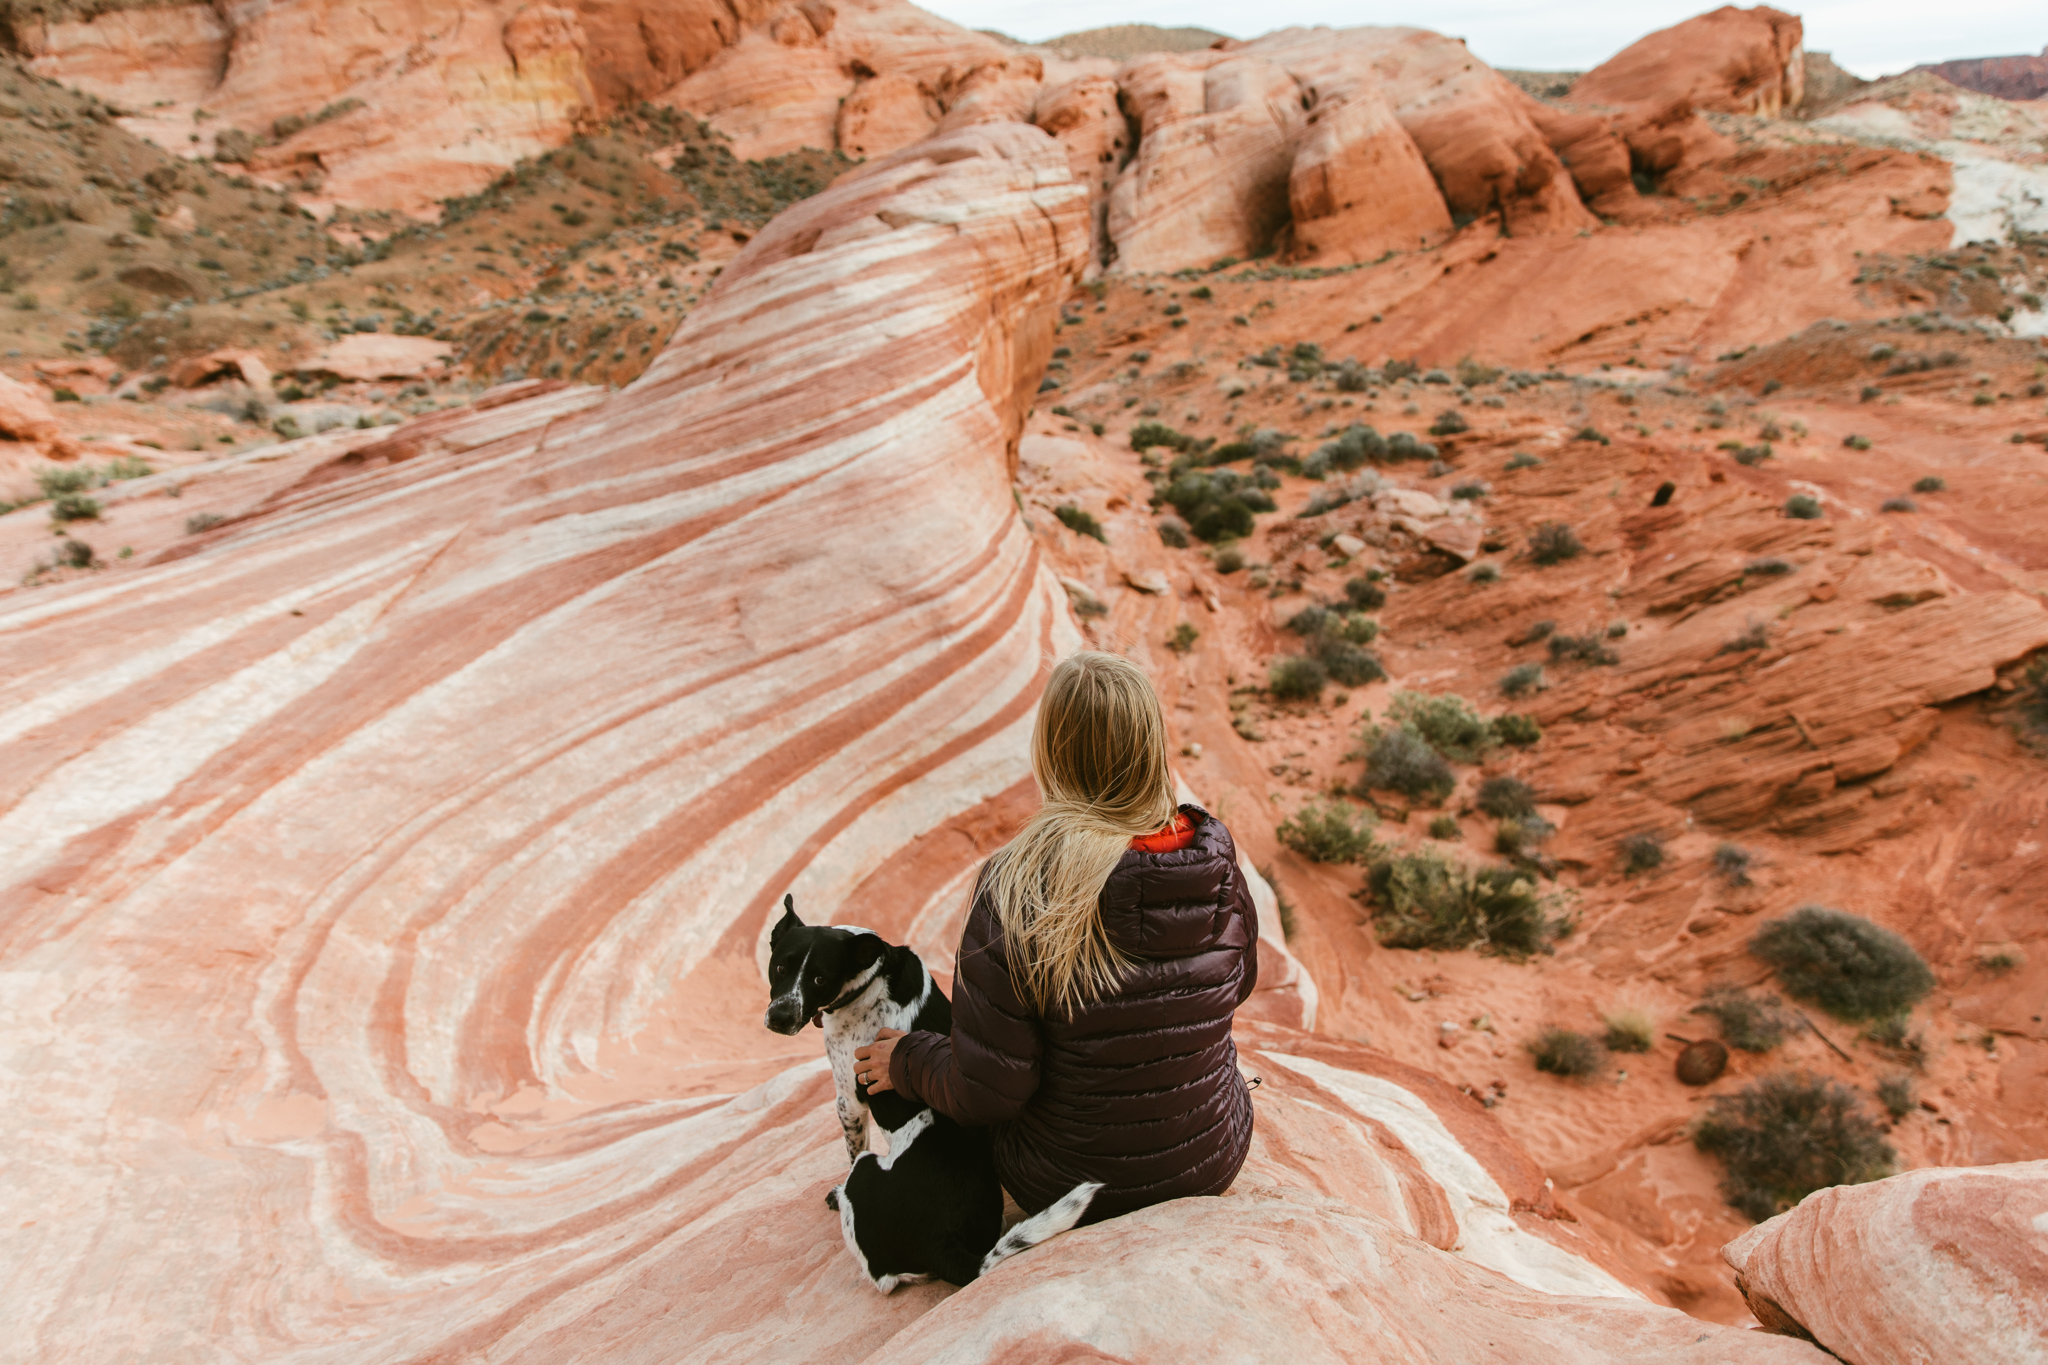 exploring valley of fire state park | utah and california adventure elopement photographers | the hearnes adventure photography | www.thehearnes.com